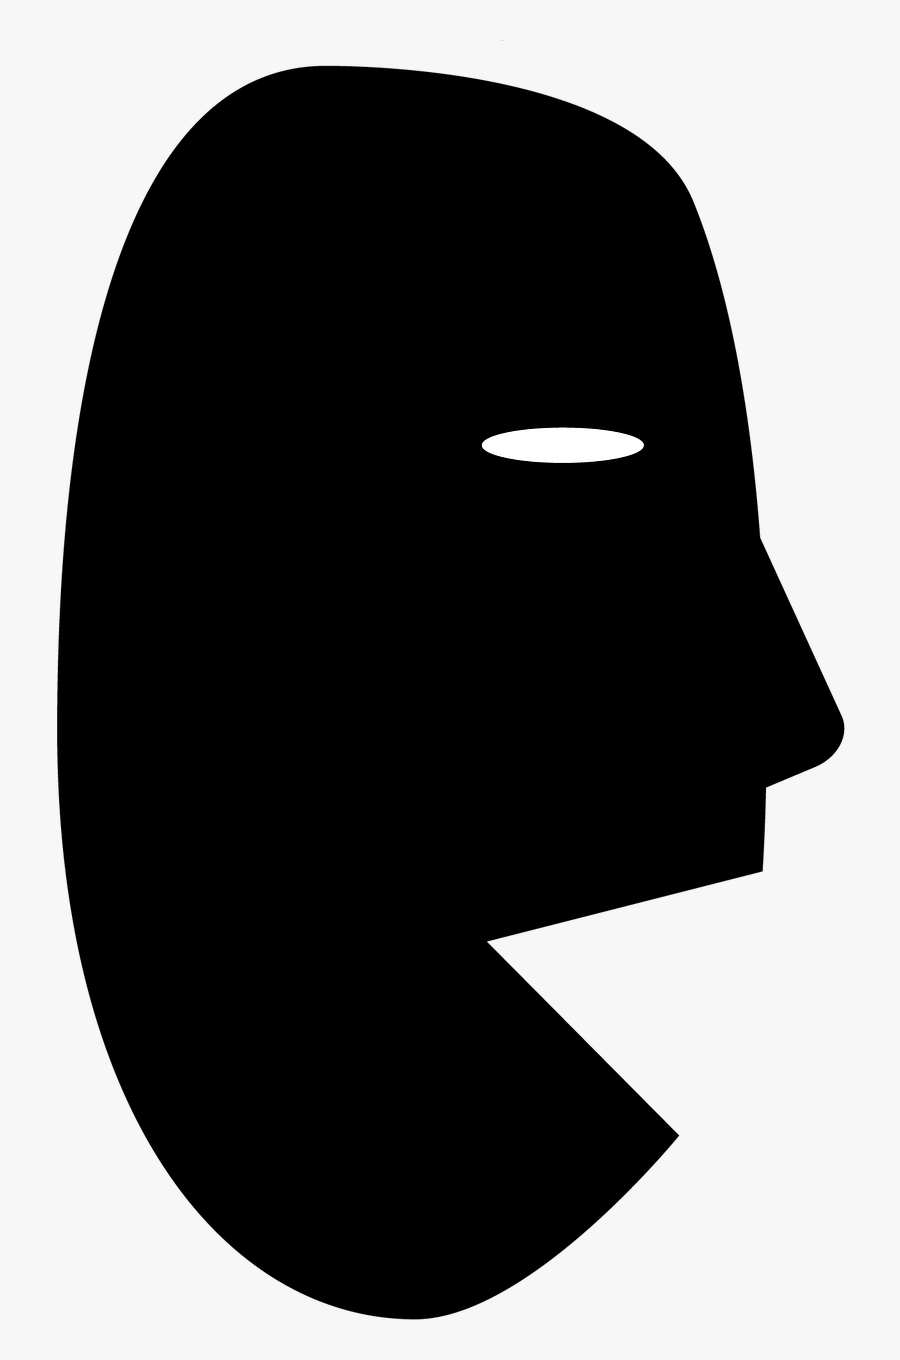 Talking Head Silhouette Free Picture - Talking Head Silhouette Png, Transparent Clipart